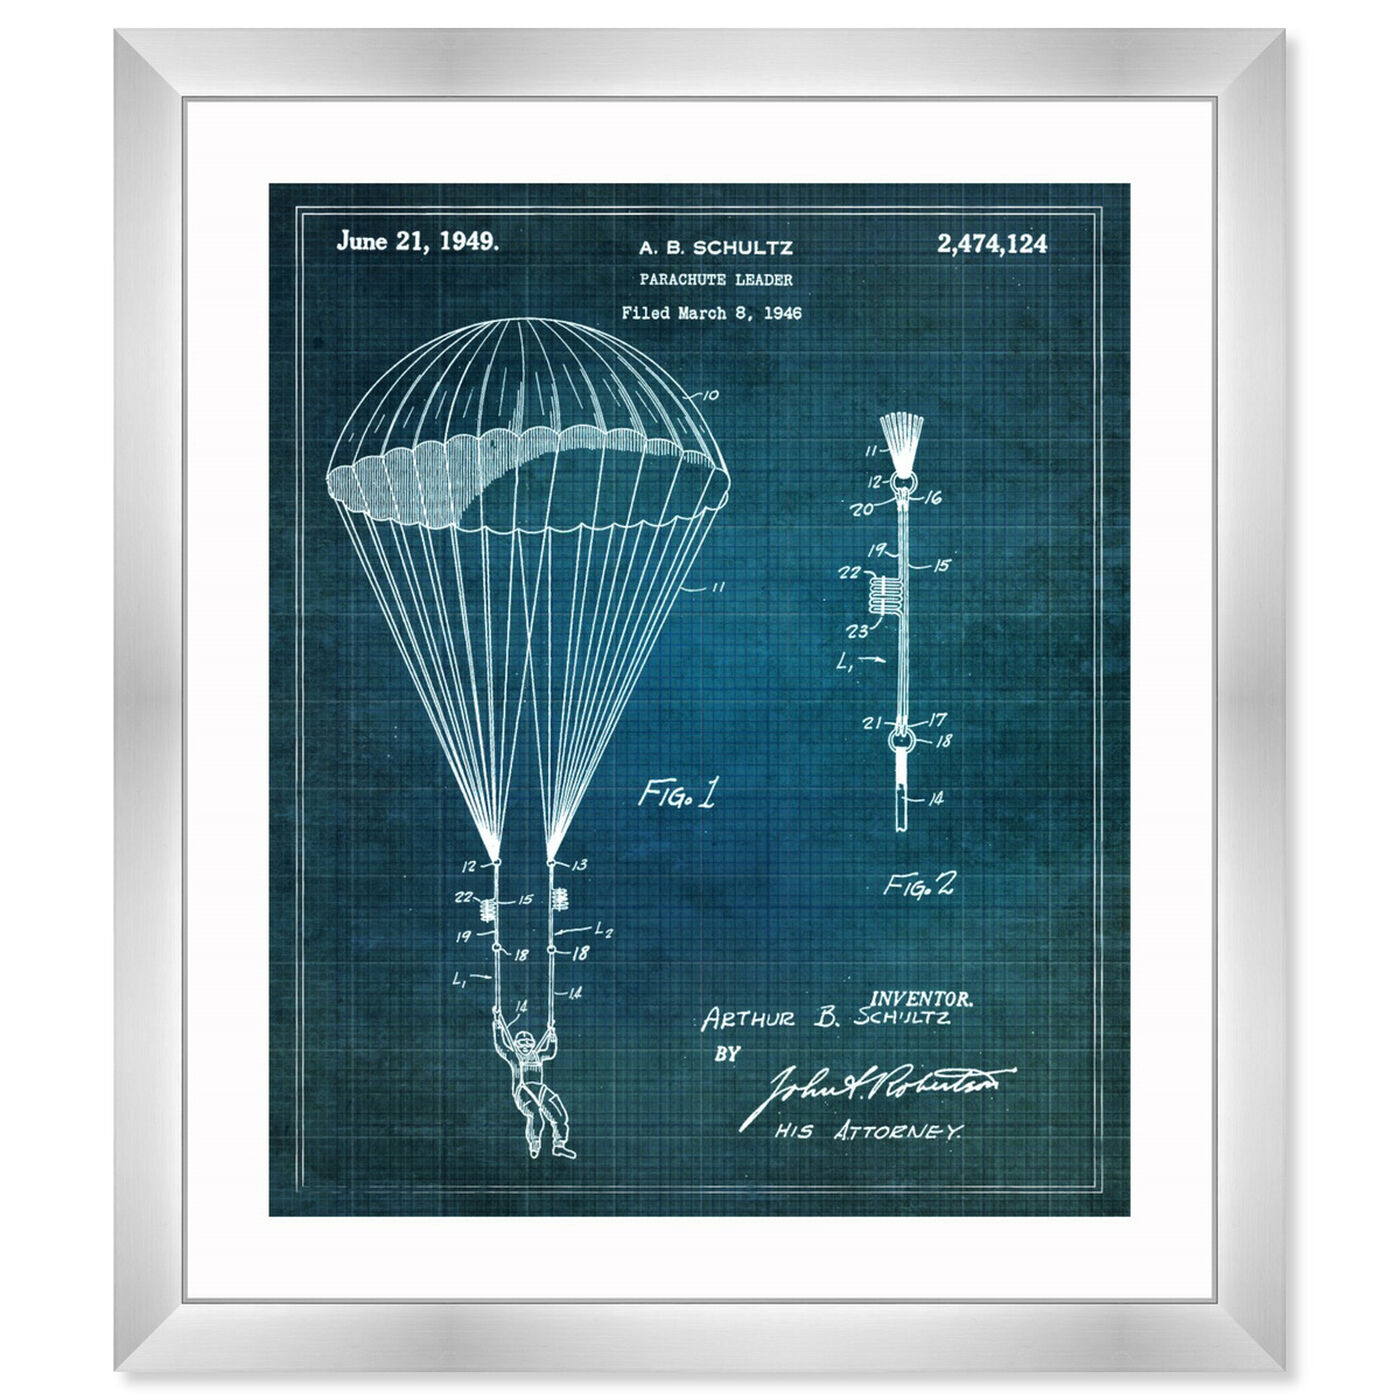 Front view of Parachute Leader 1949 featuring transportation and air transportation art.